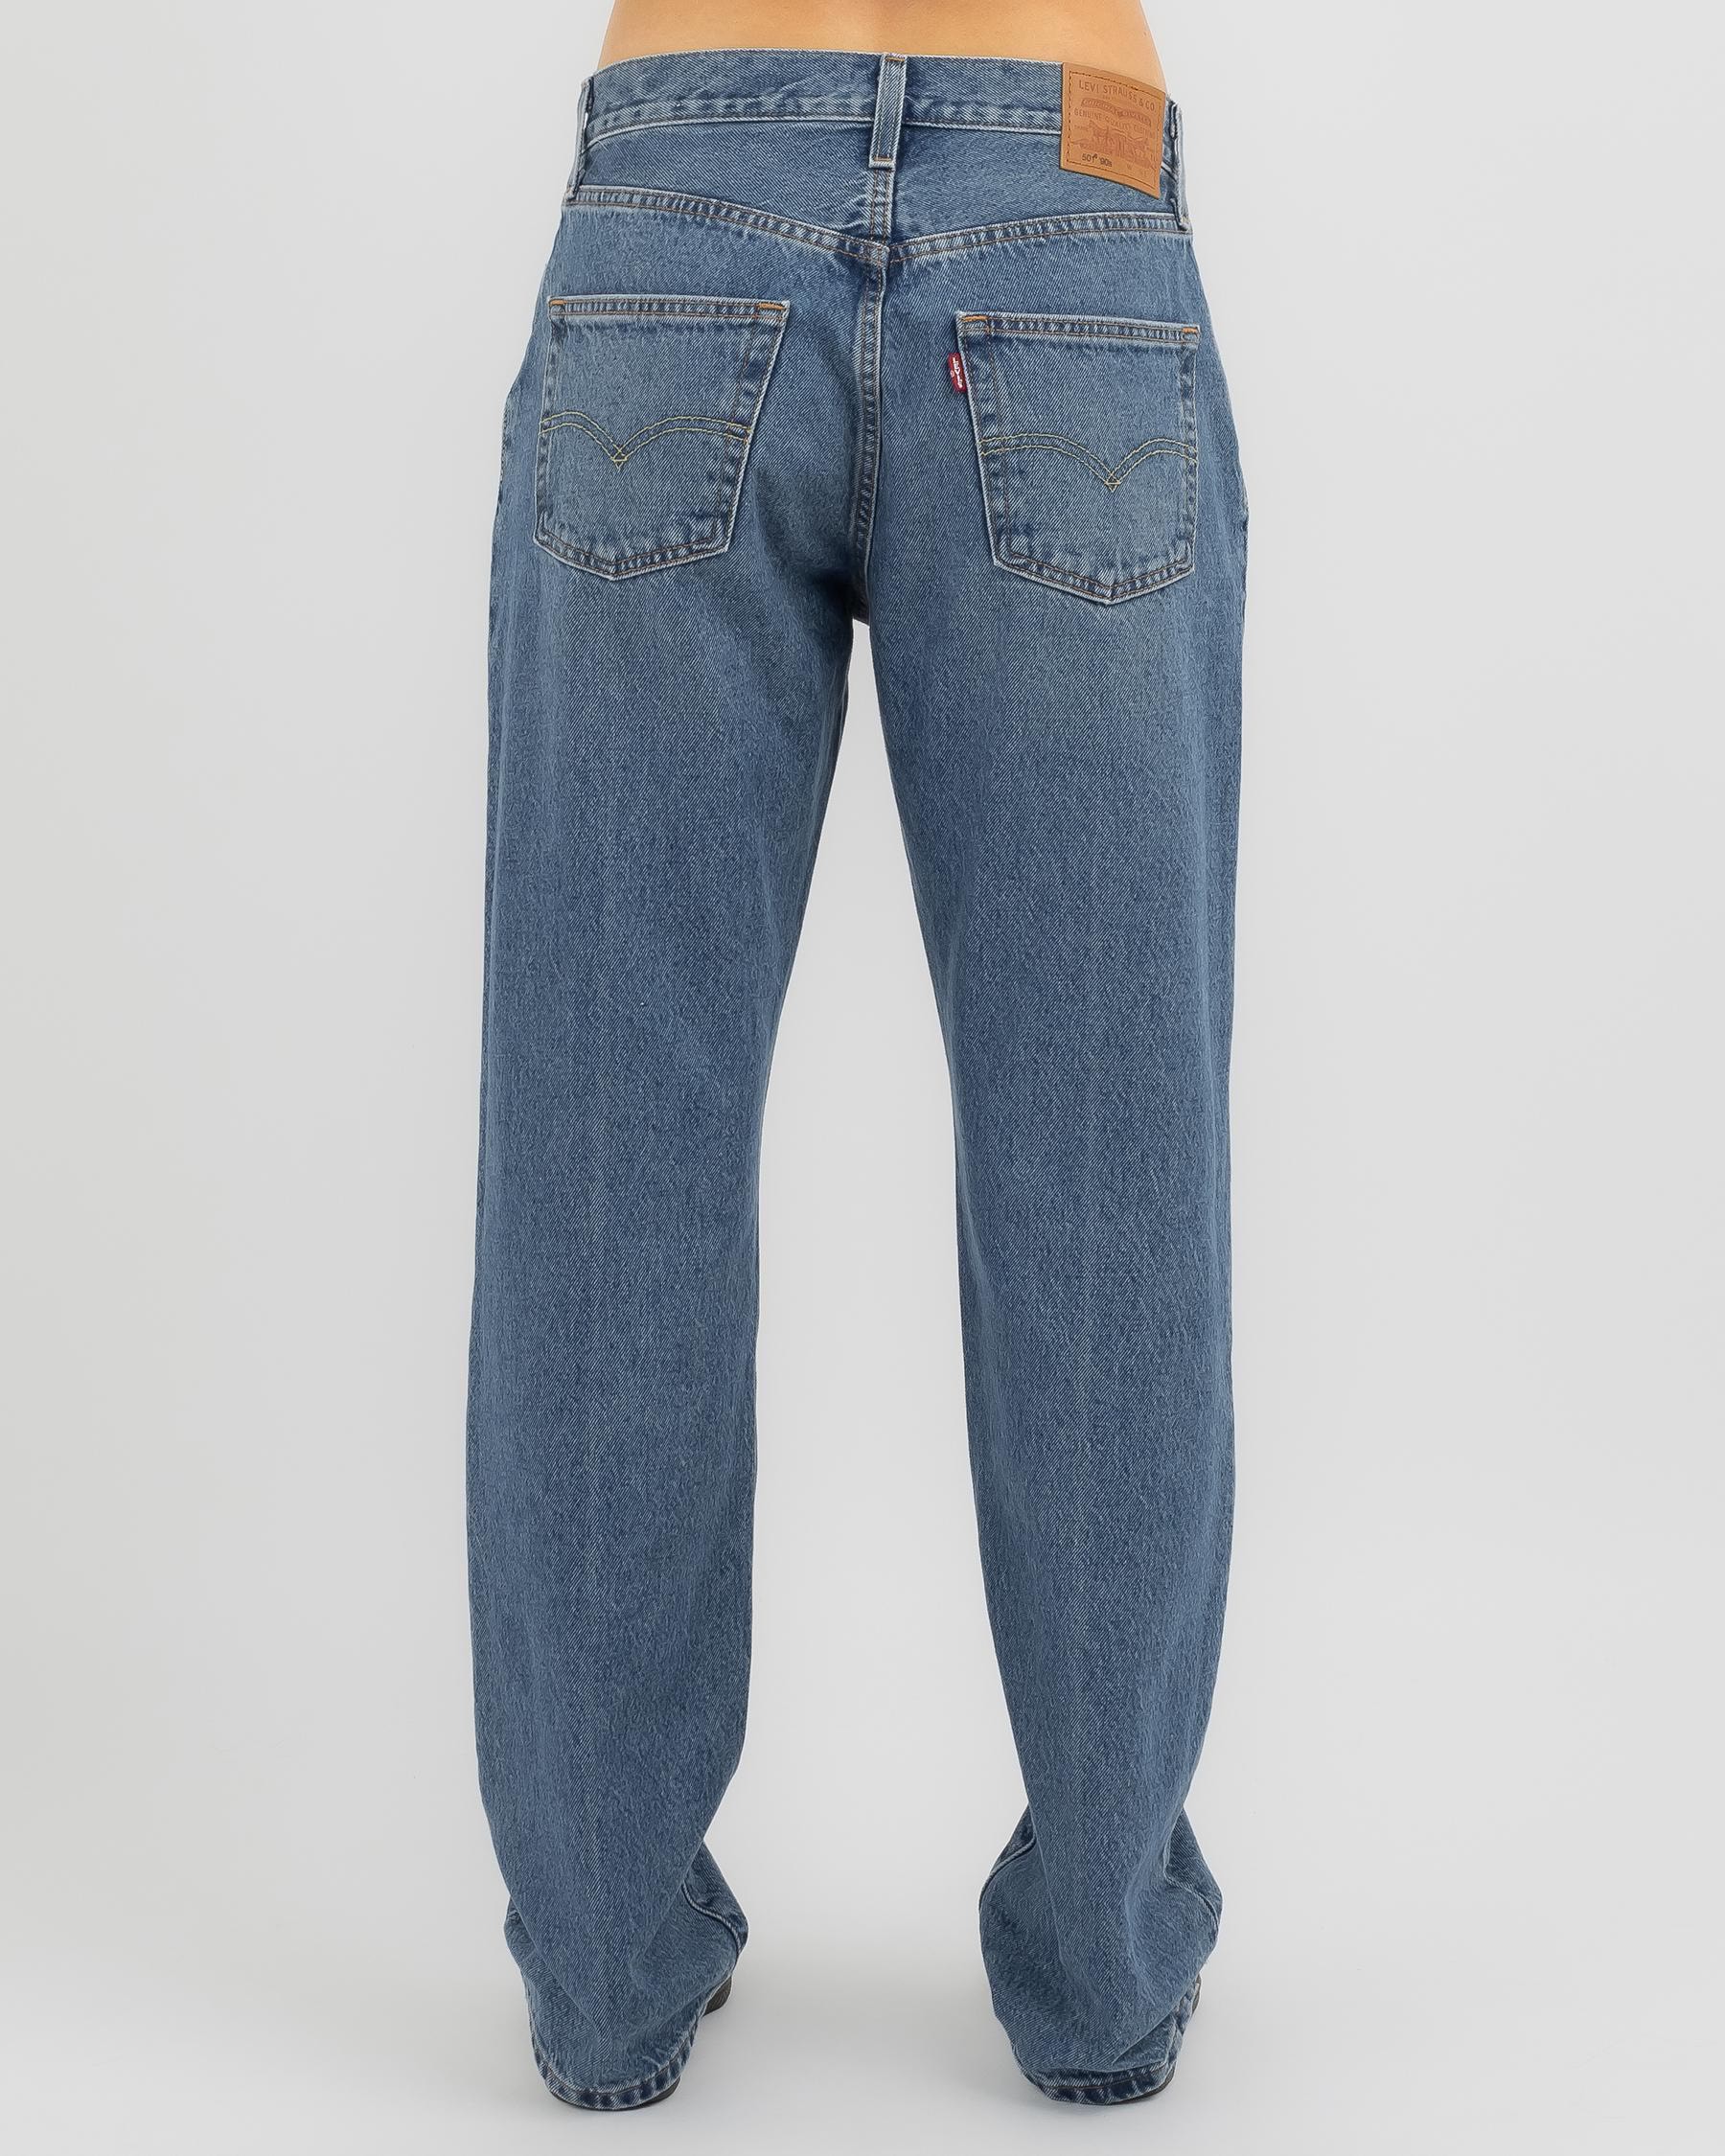 Shop Levi's 501 90'S Jeans In Drew Me In - Fast Shipping & Easy Returns ...